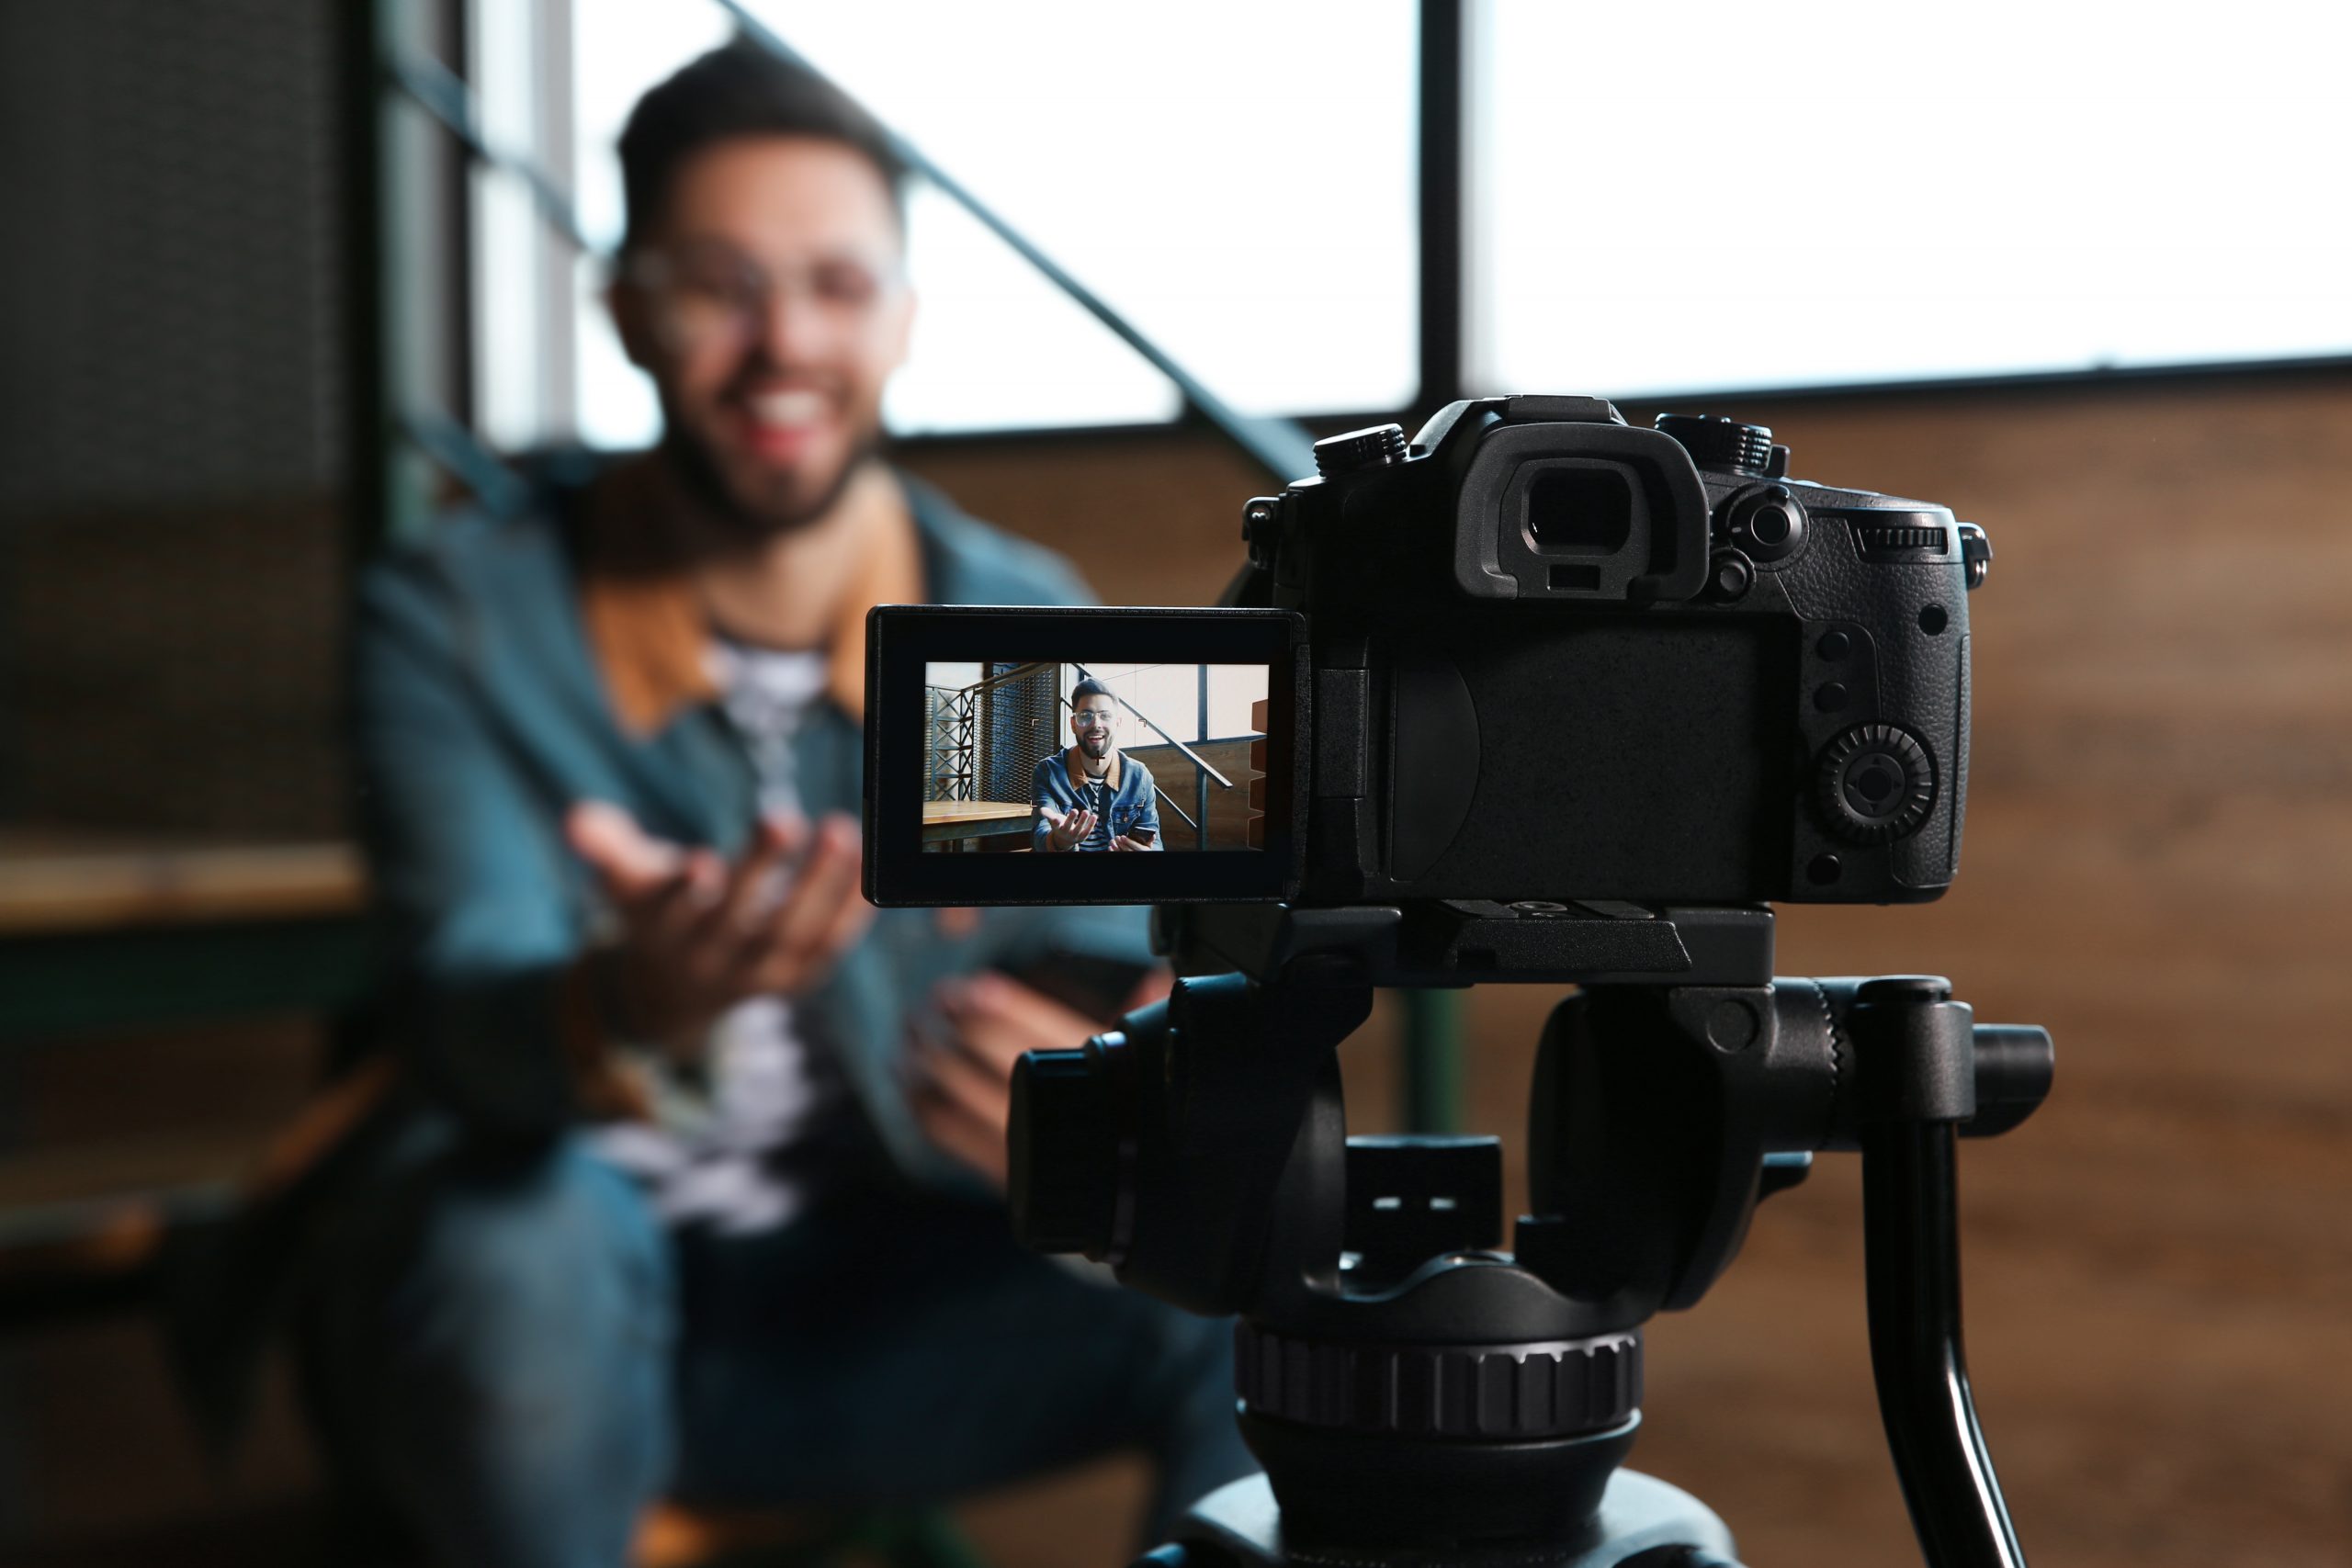 WHAT MAKES SUCCESSFUL VIDEO MARKETING?